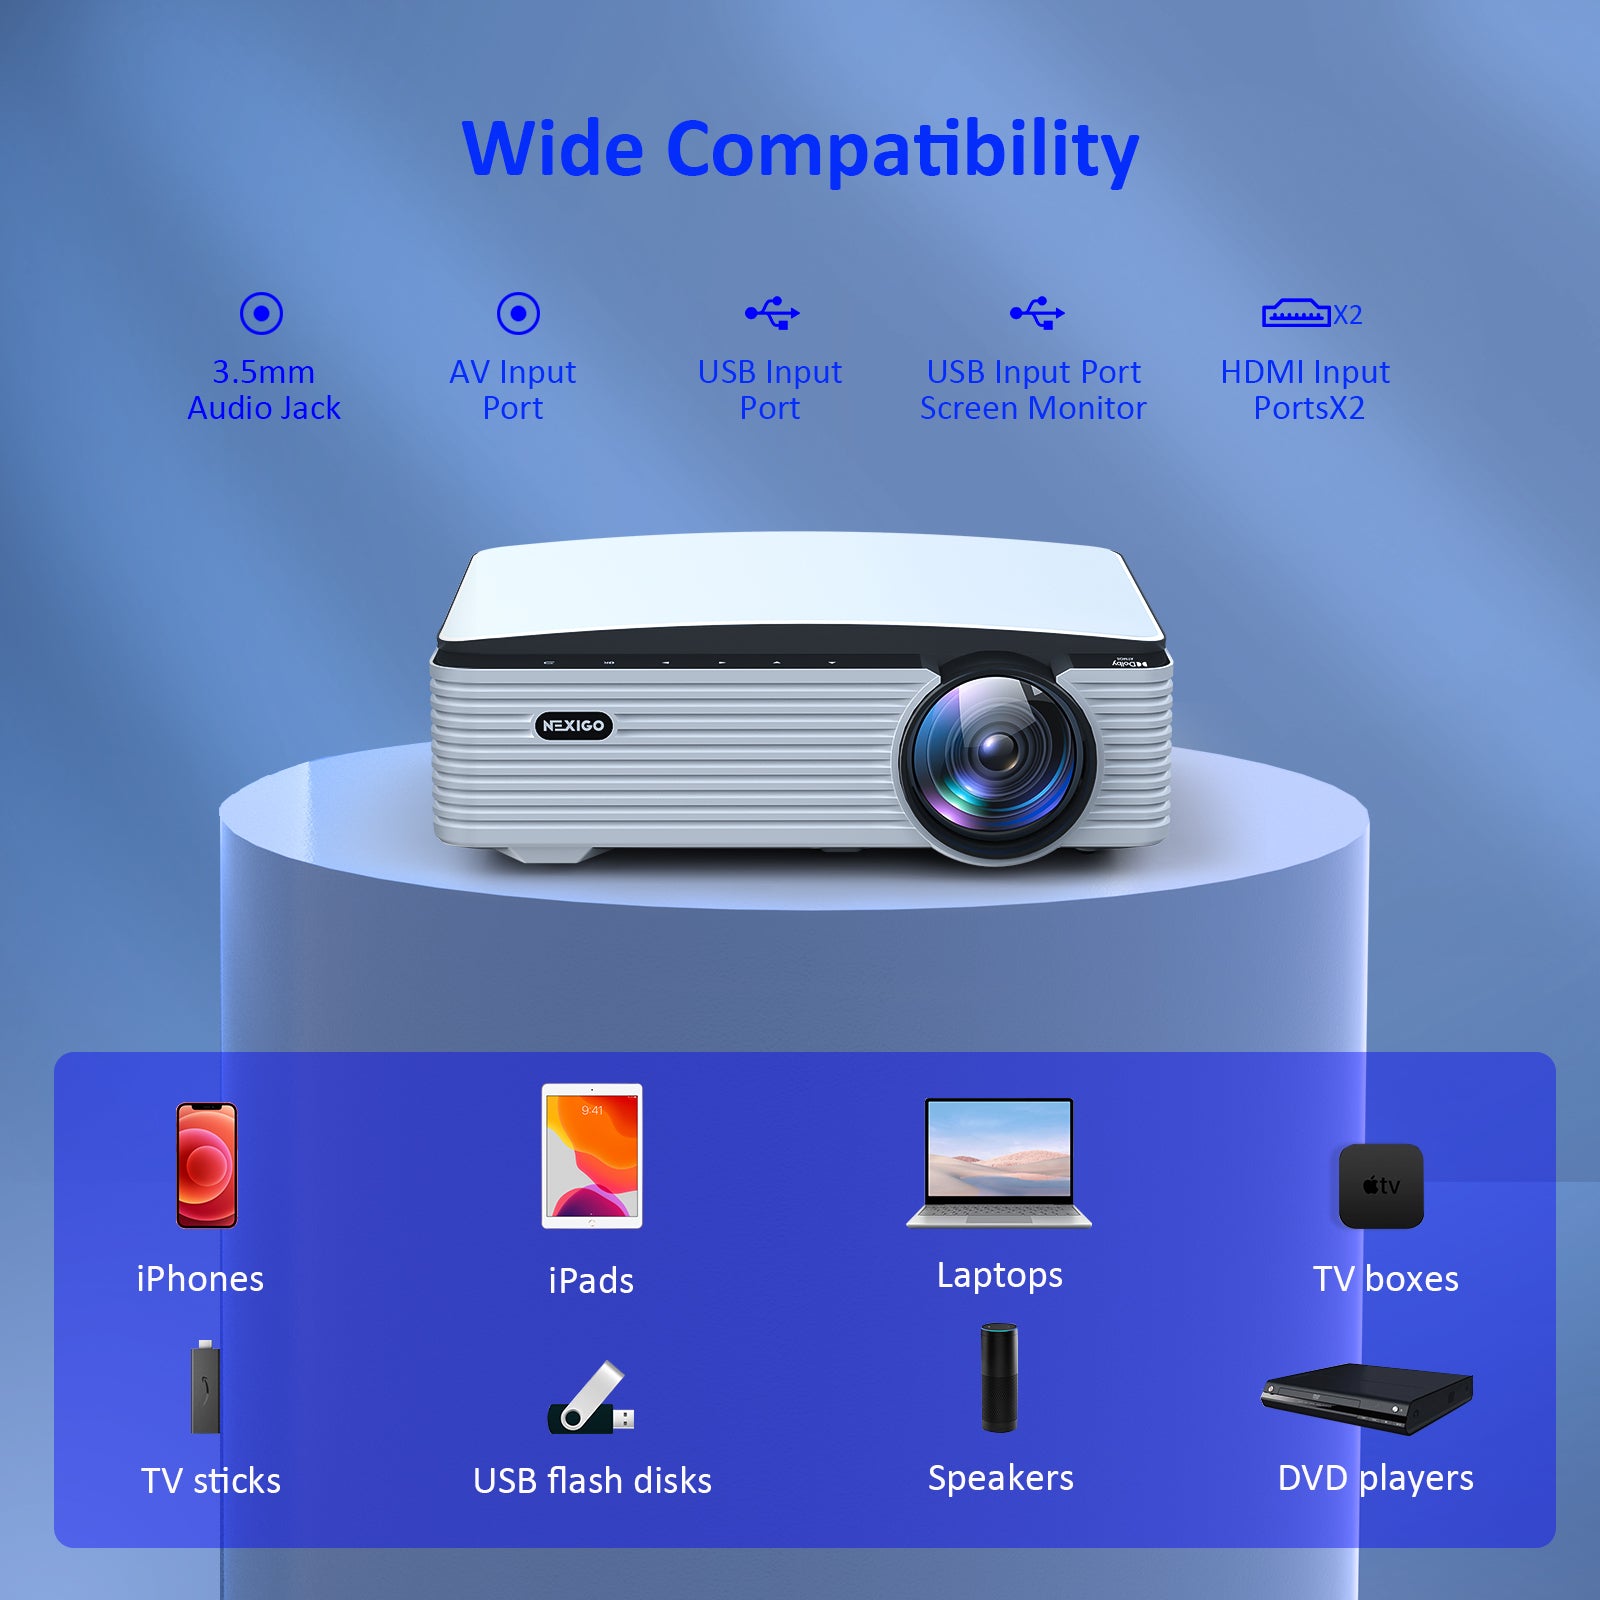 This projector has HDMI, USB, AV, and 3.5mm audio ports for easy connection to various devices.